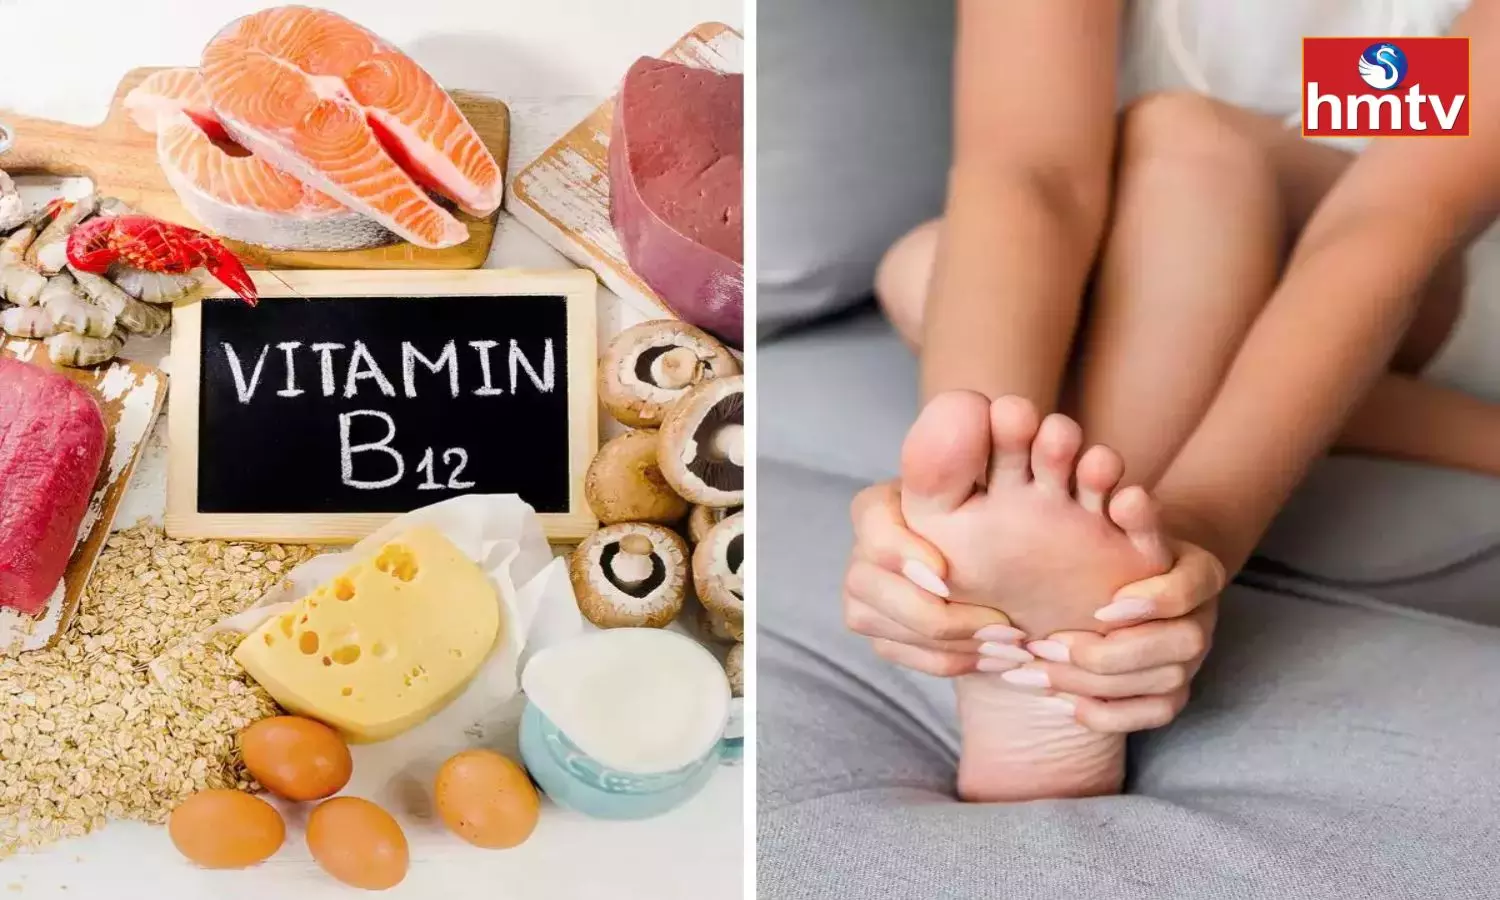 Vitamin B12 Deficiency is Very Dangerous These Foods Should be in the Diet